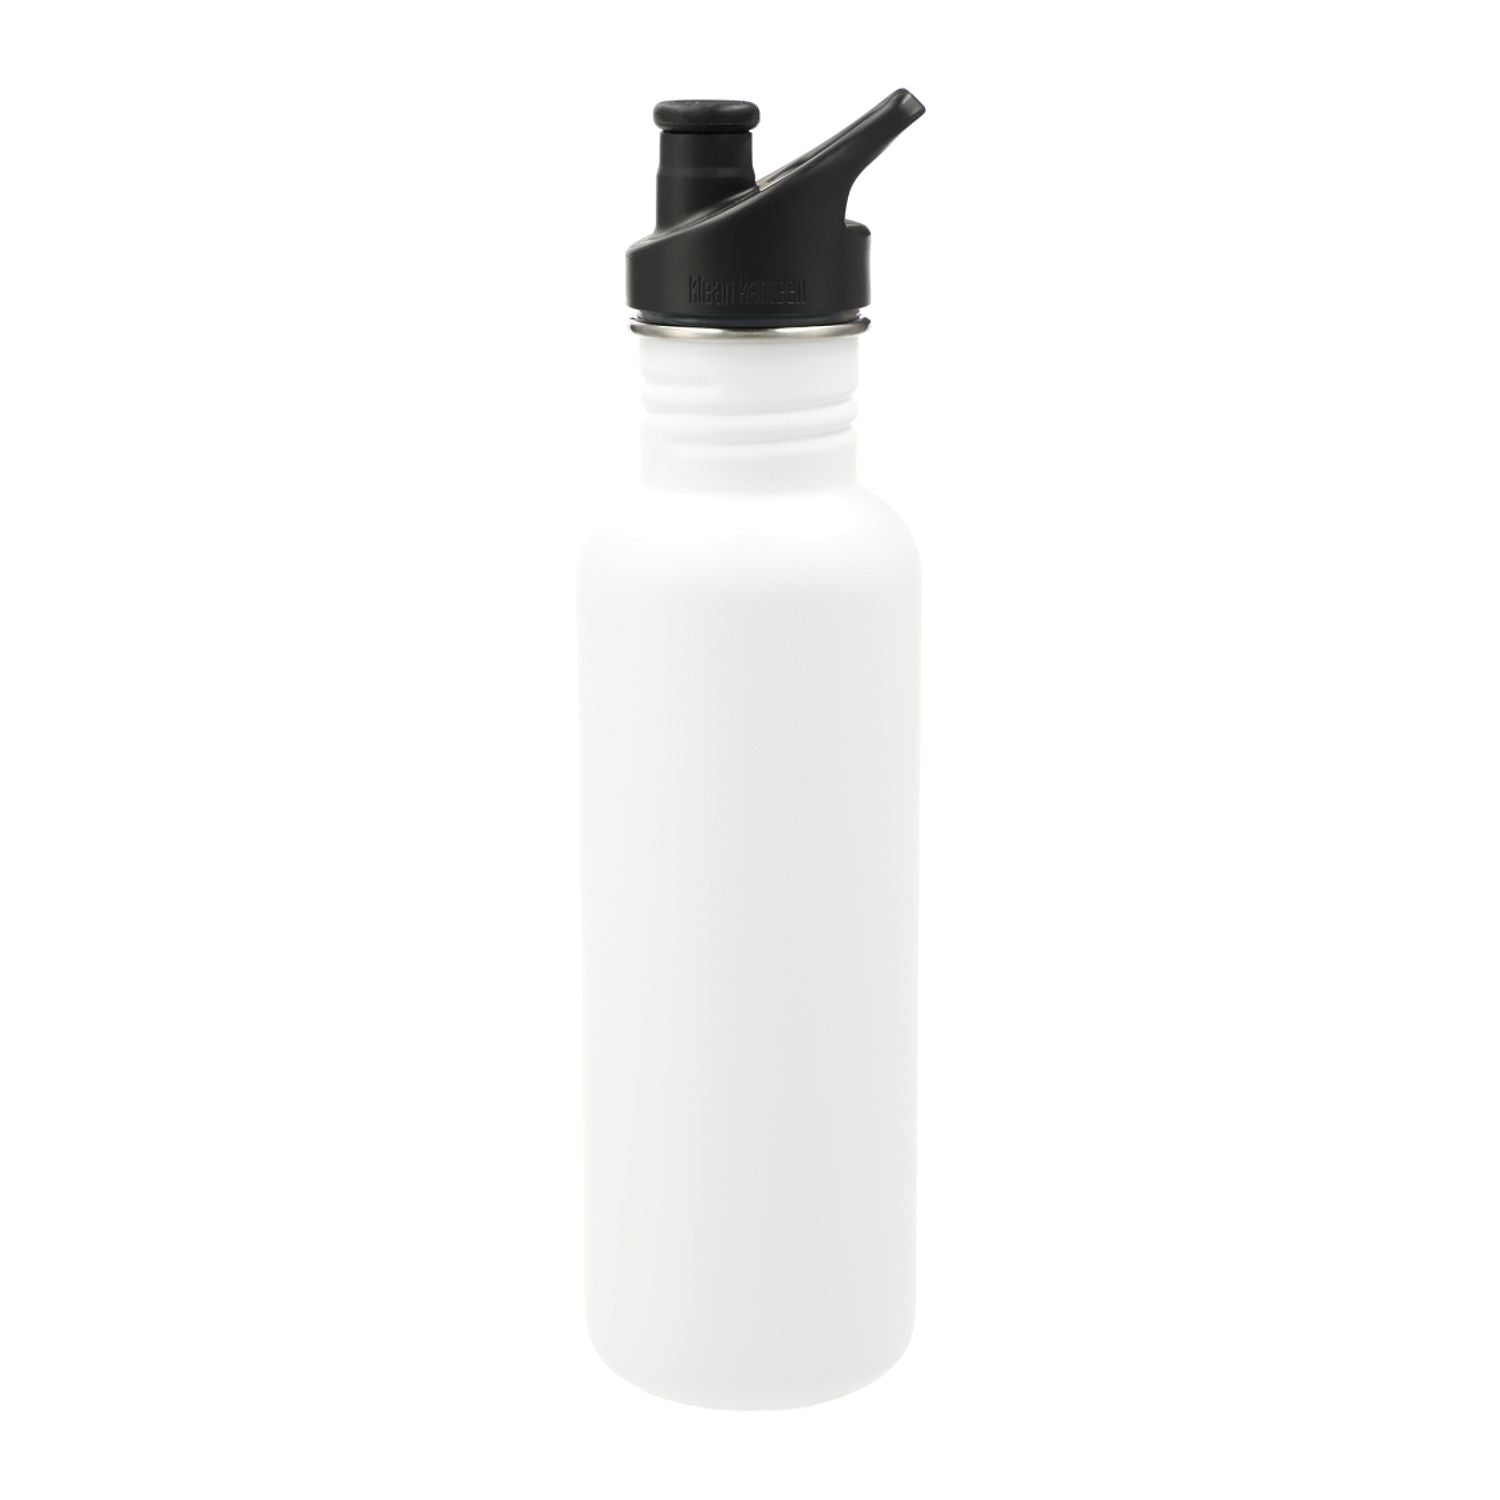 Klean Kanteen 27 oz Eco Classic Single-Walled With Sport Cap in white.